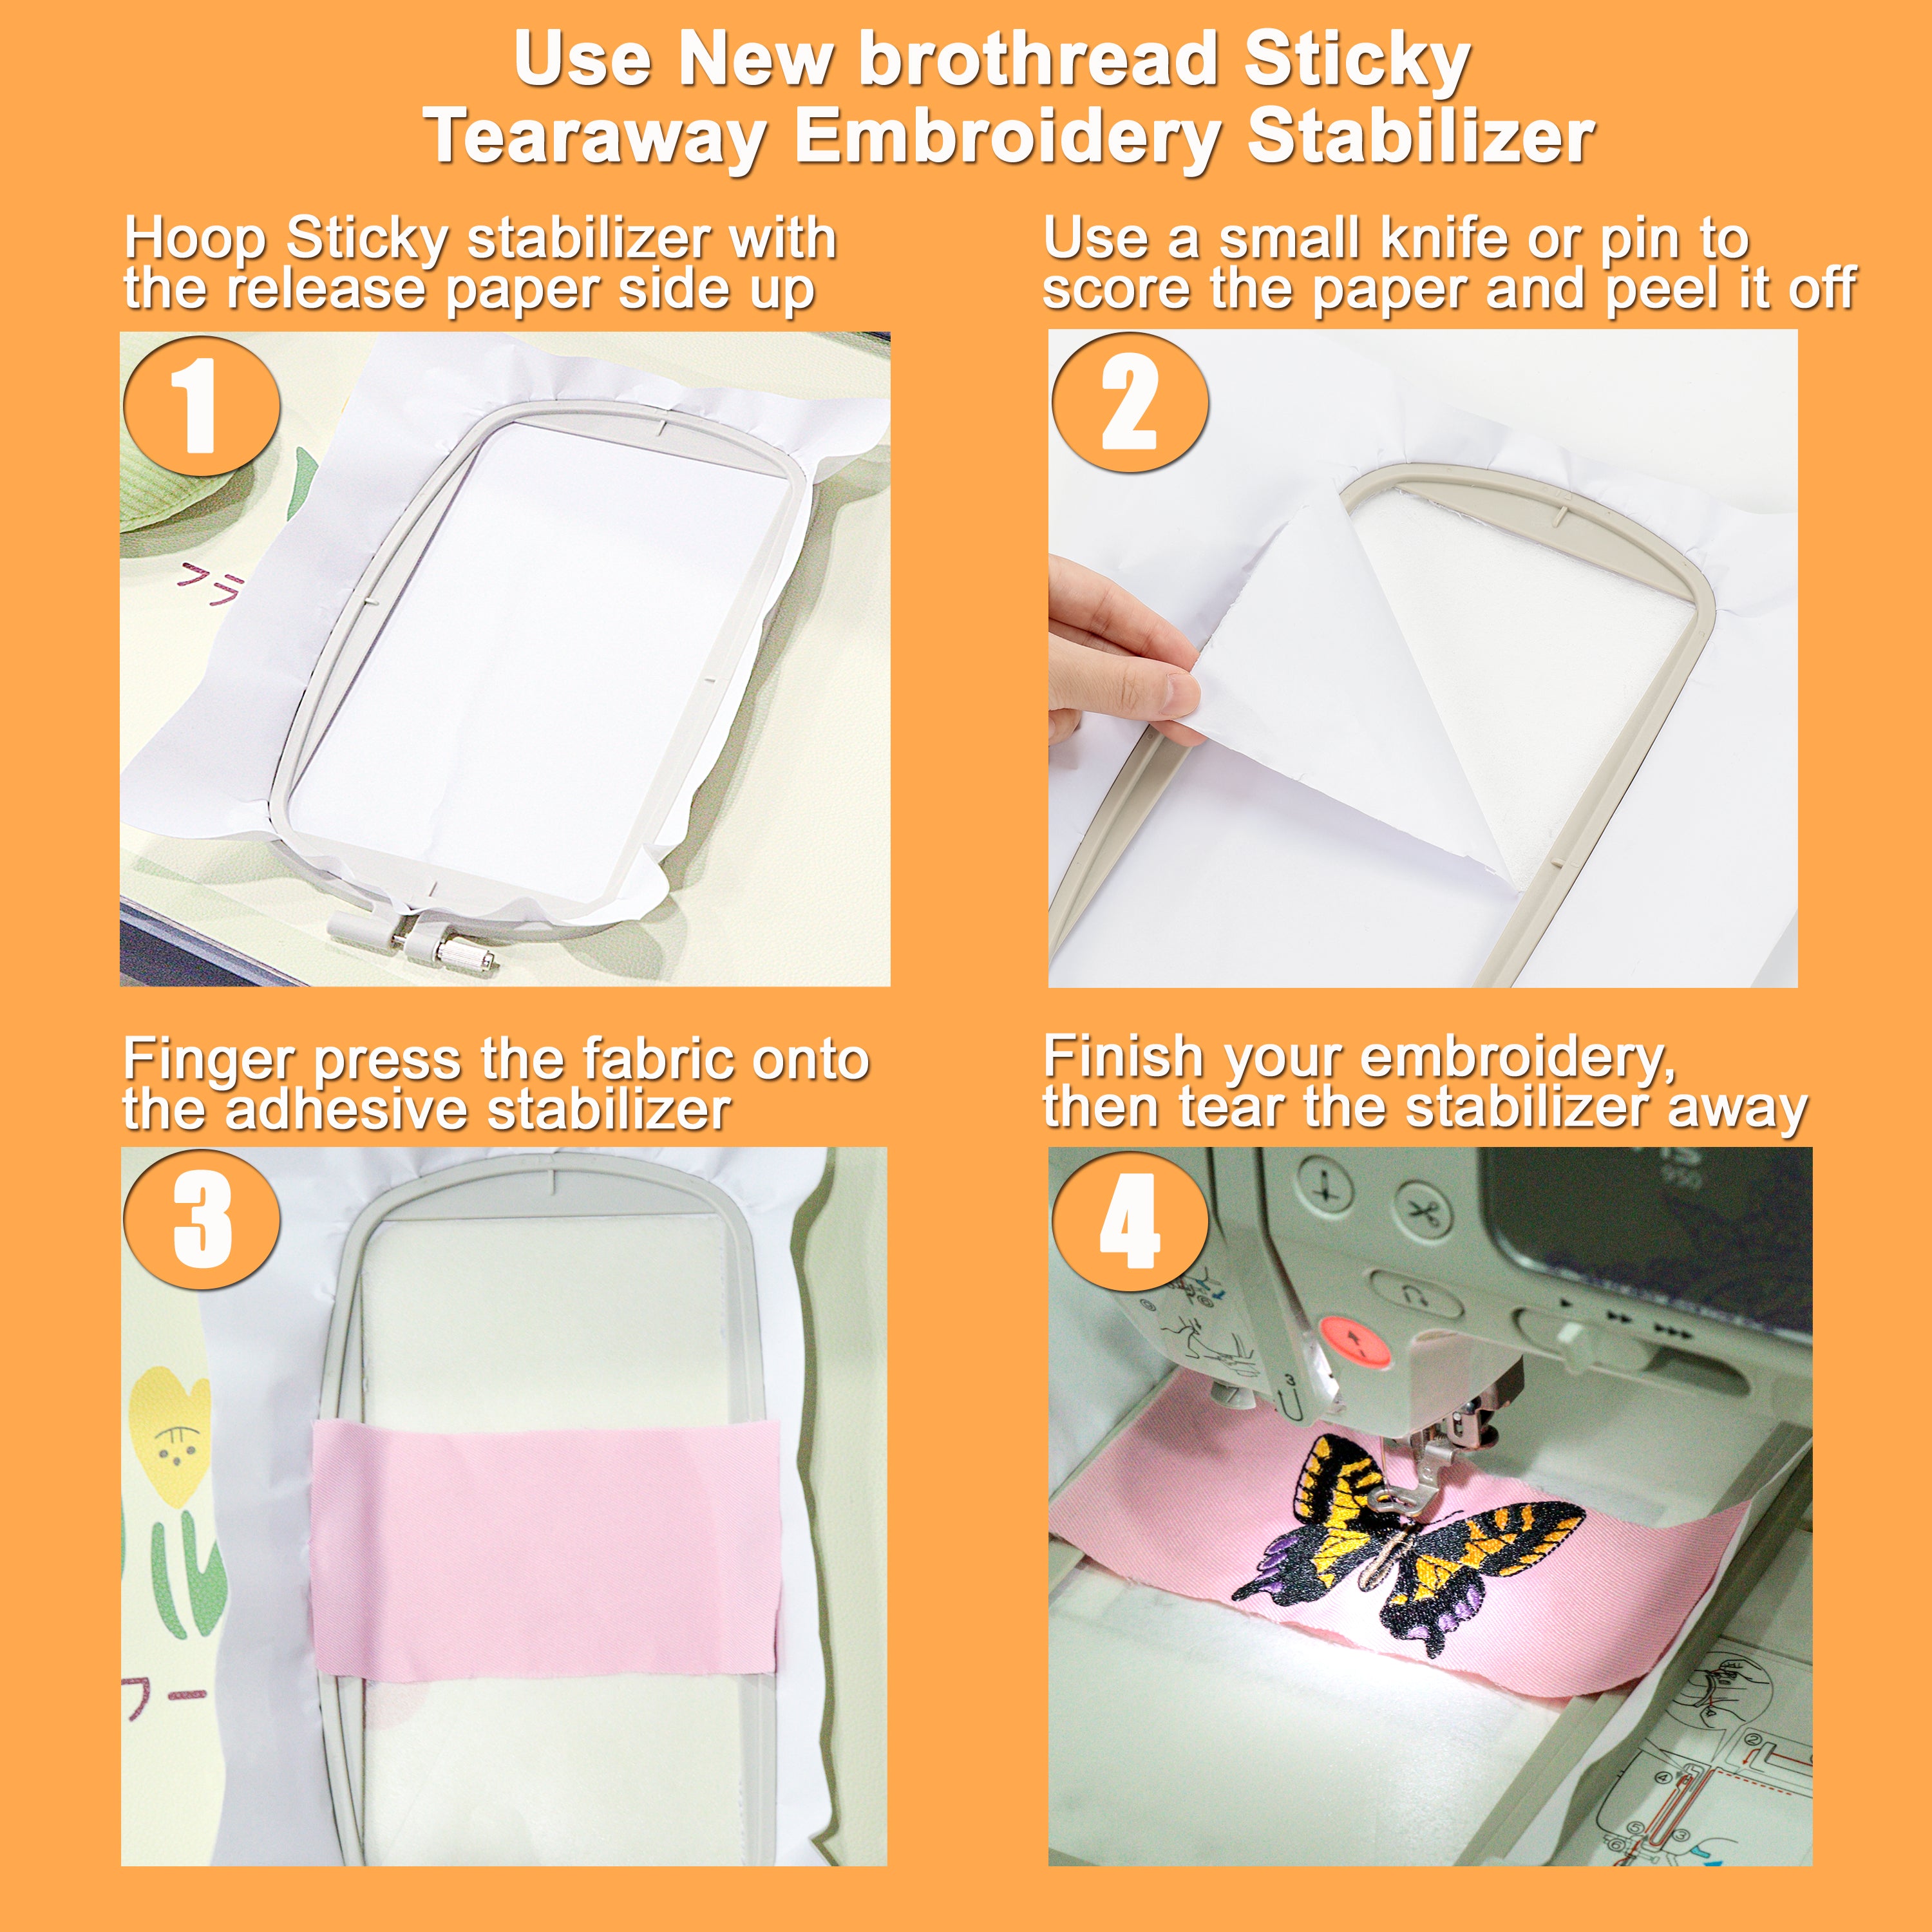 New brothread Sticky Self-Adhesive Tear Away Embroidery Stabilizer Bac